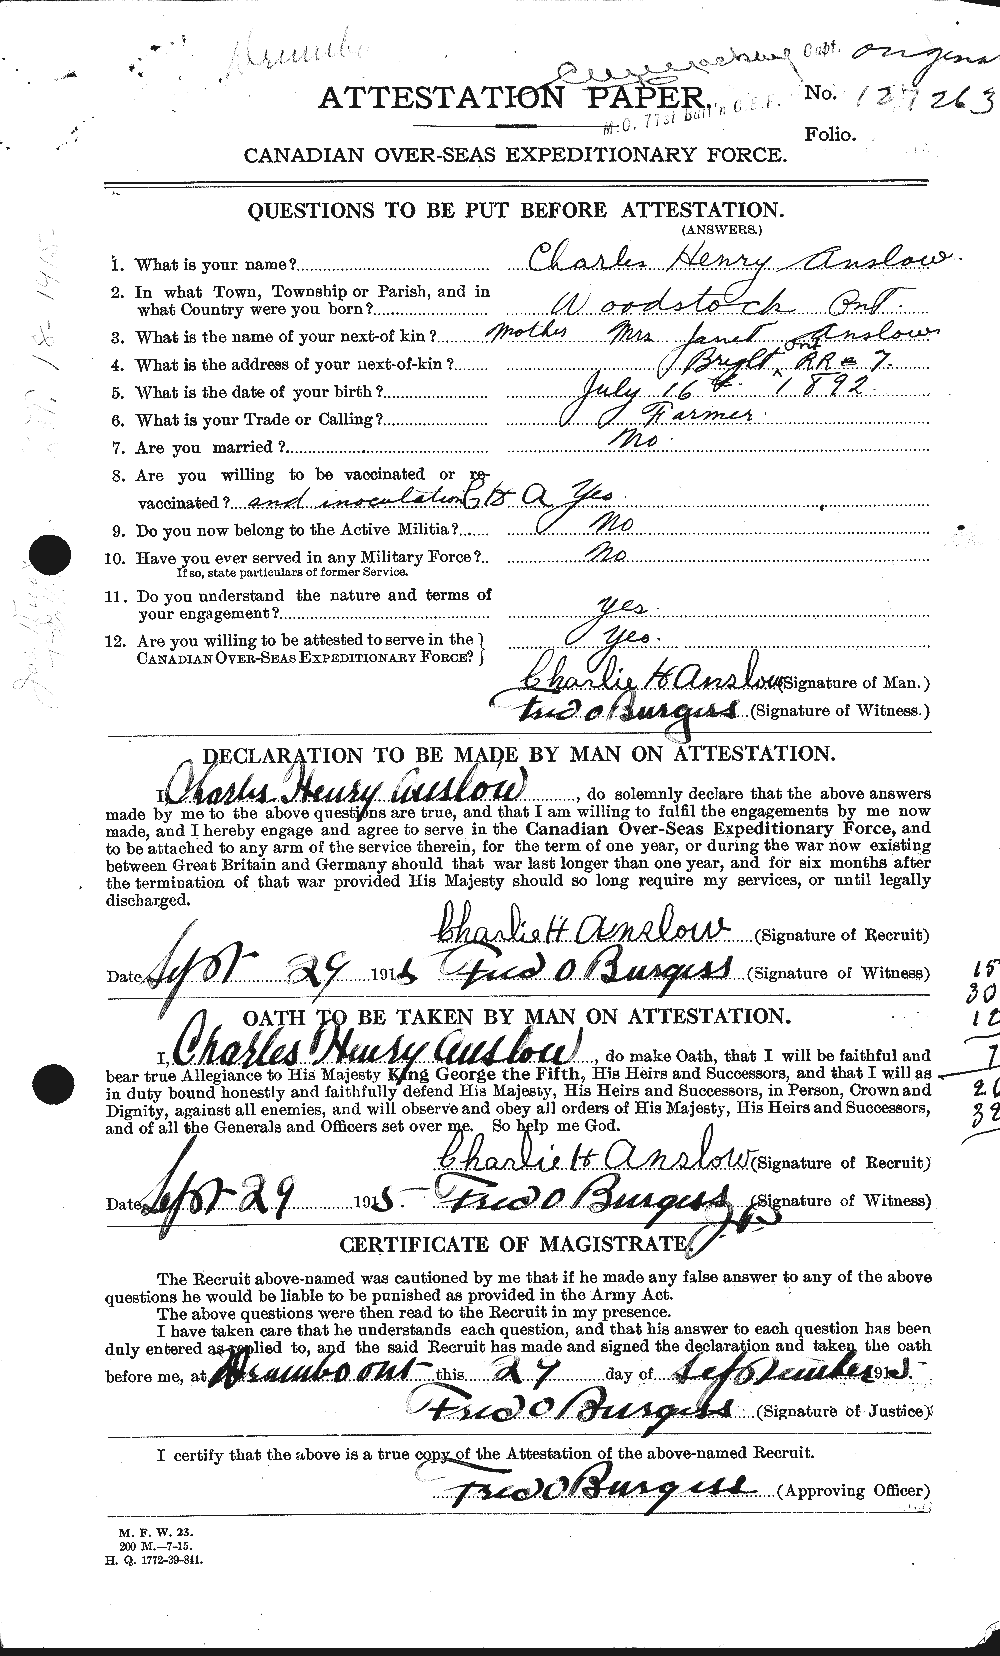 Personnel Records of the First World War - CEF 531067a